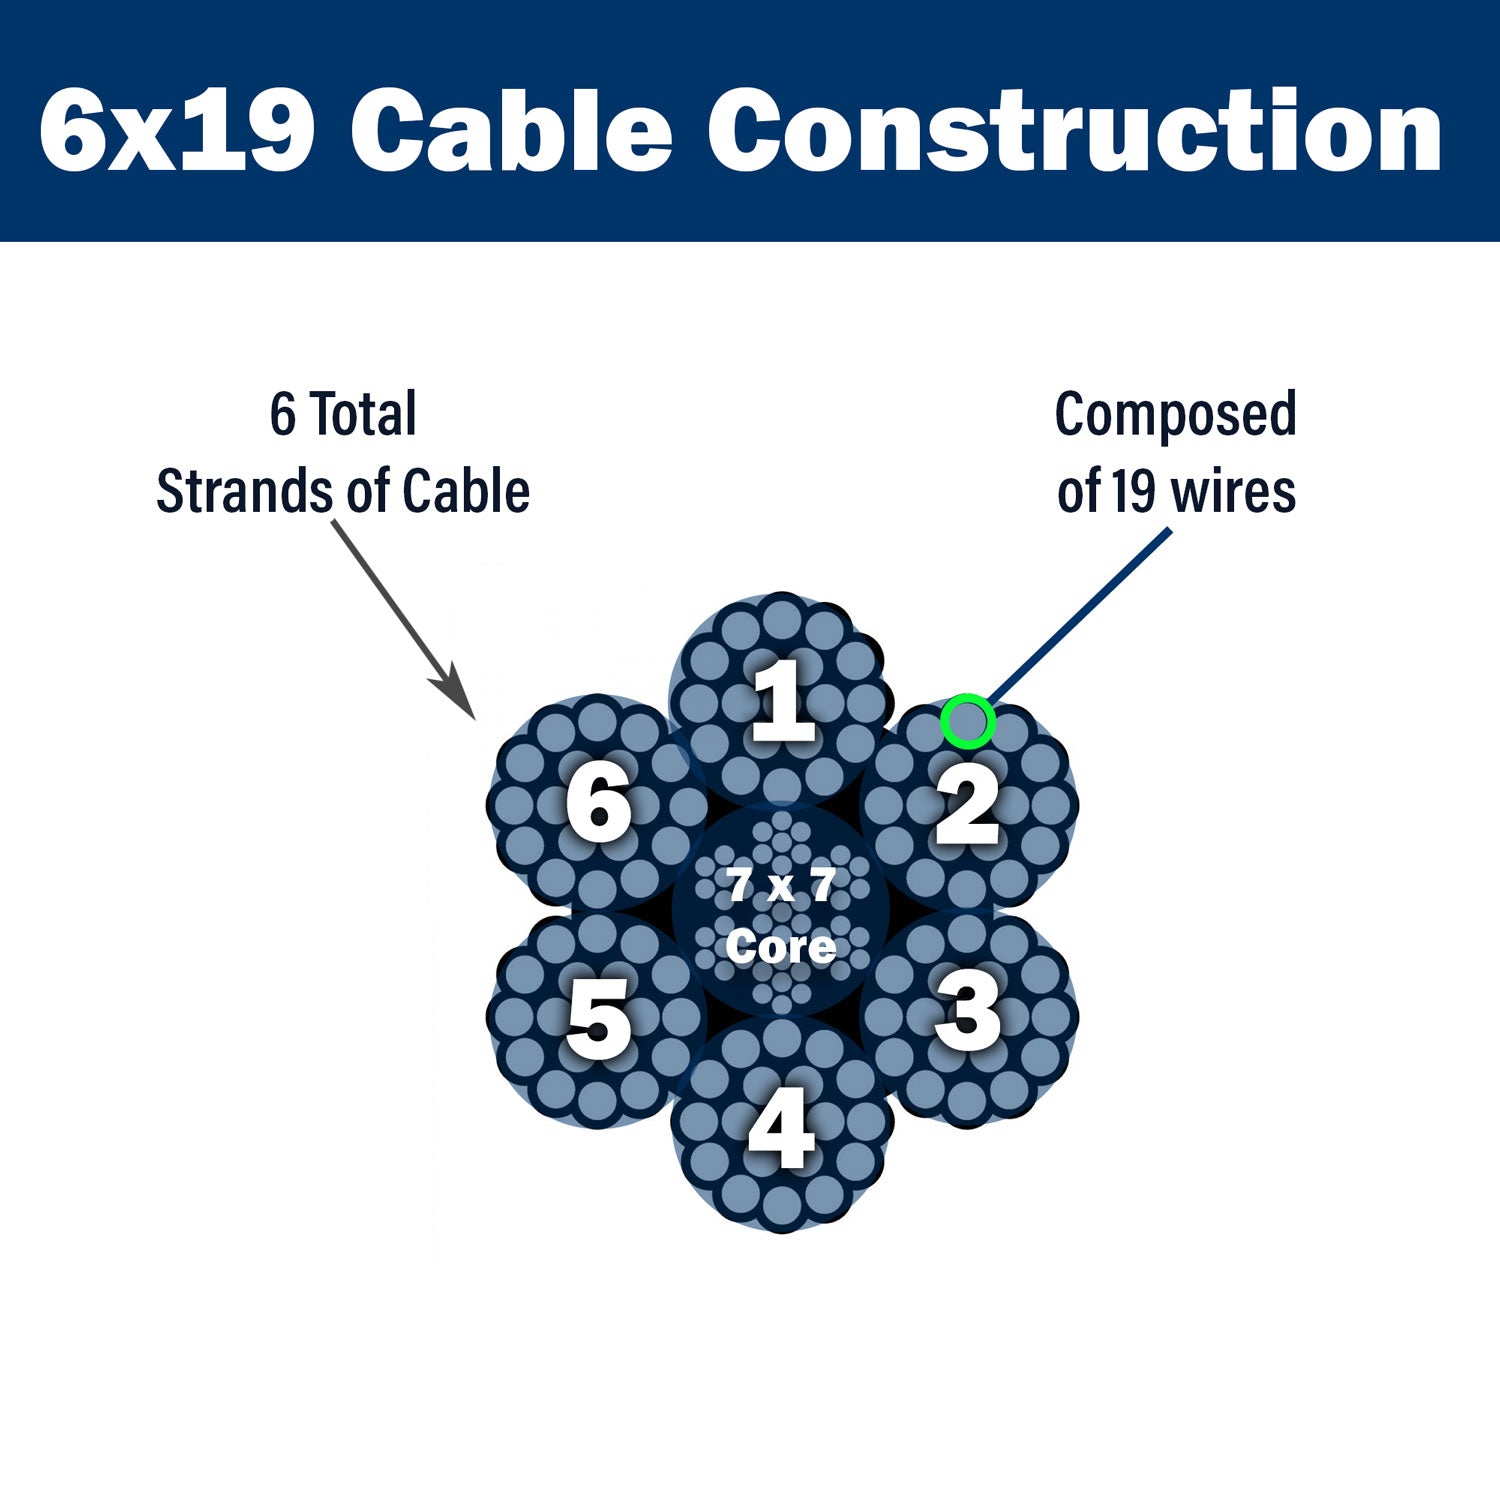 6x19 cable construction graphic